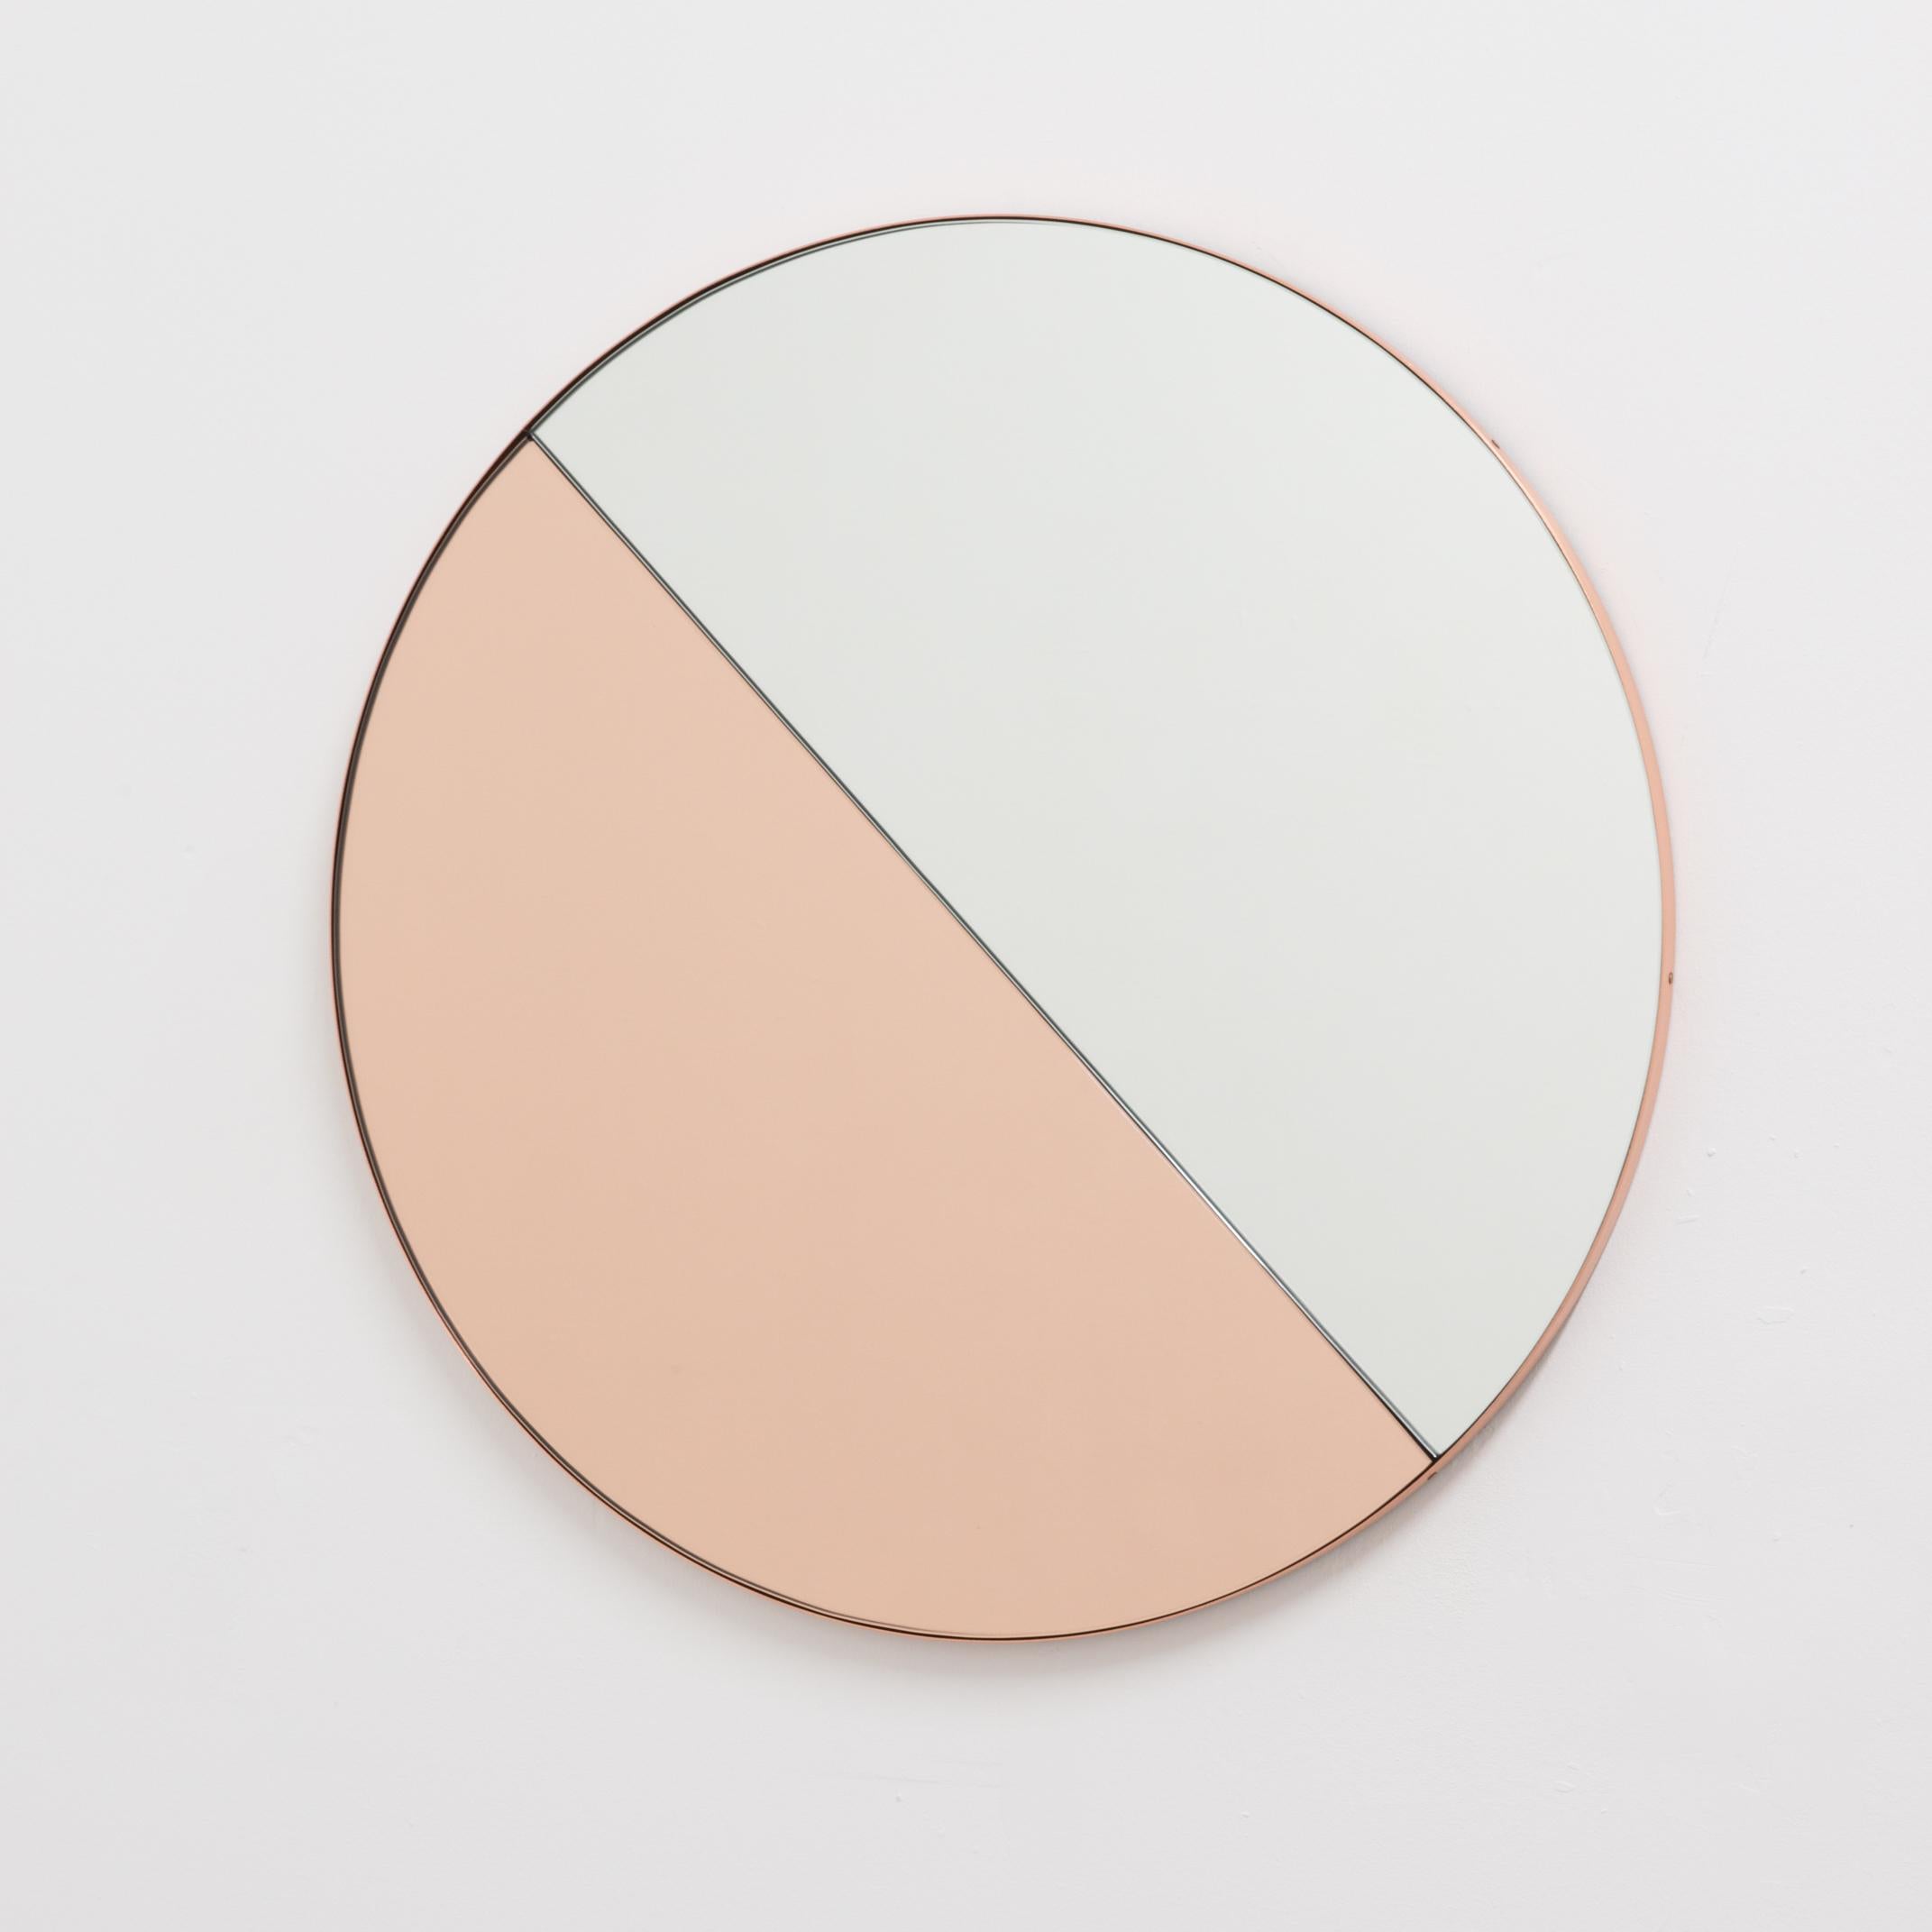 Orbis Dualis Mixed Rose Gold and Silver Round Mirror with Copper Frame, Large For Sale 3